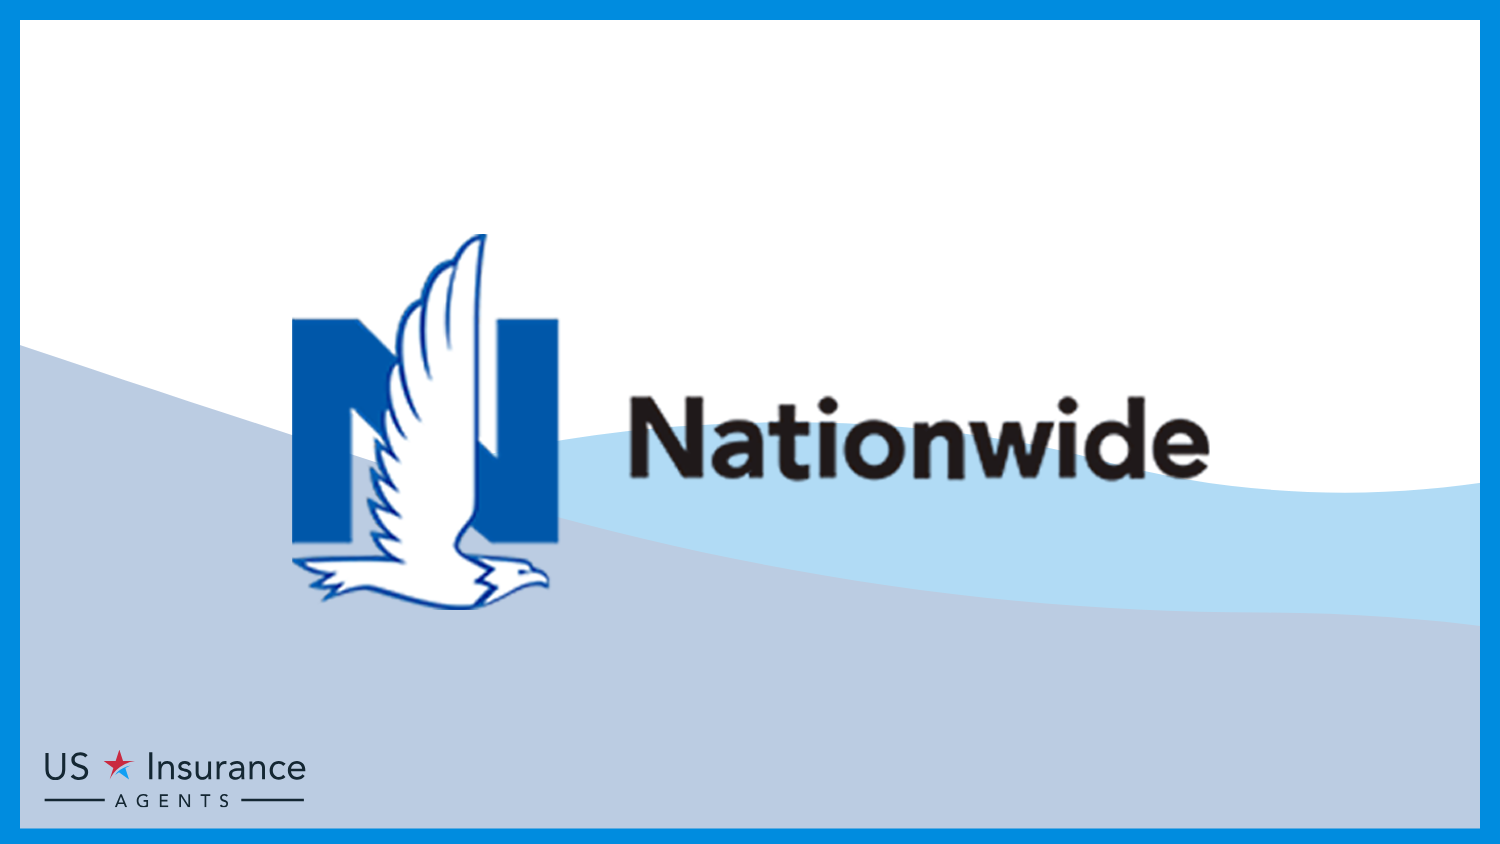 Nationwide: Best Business Insurance for Event Planners